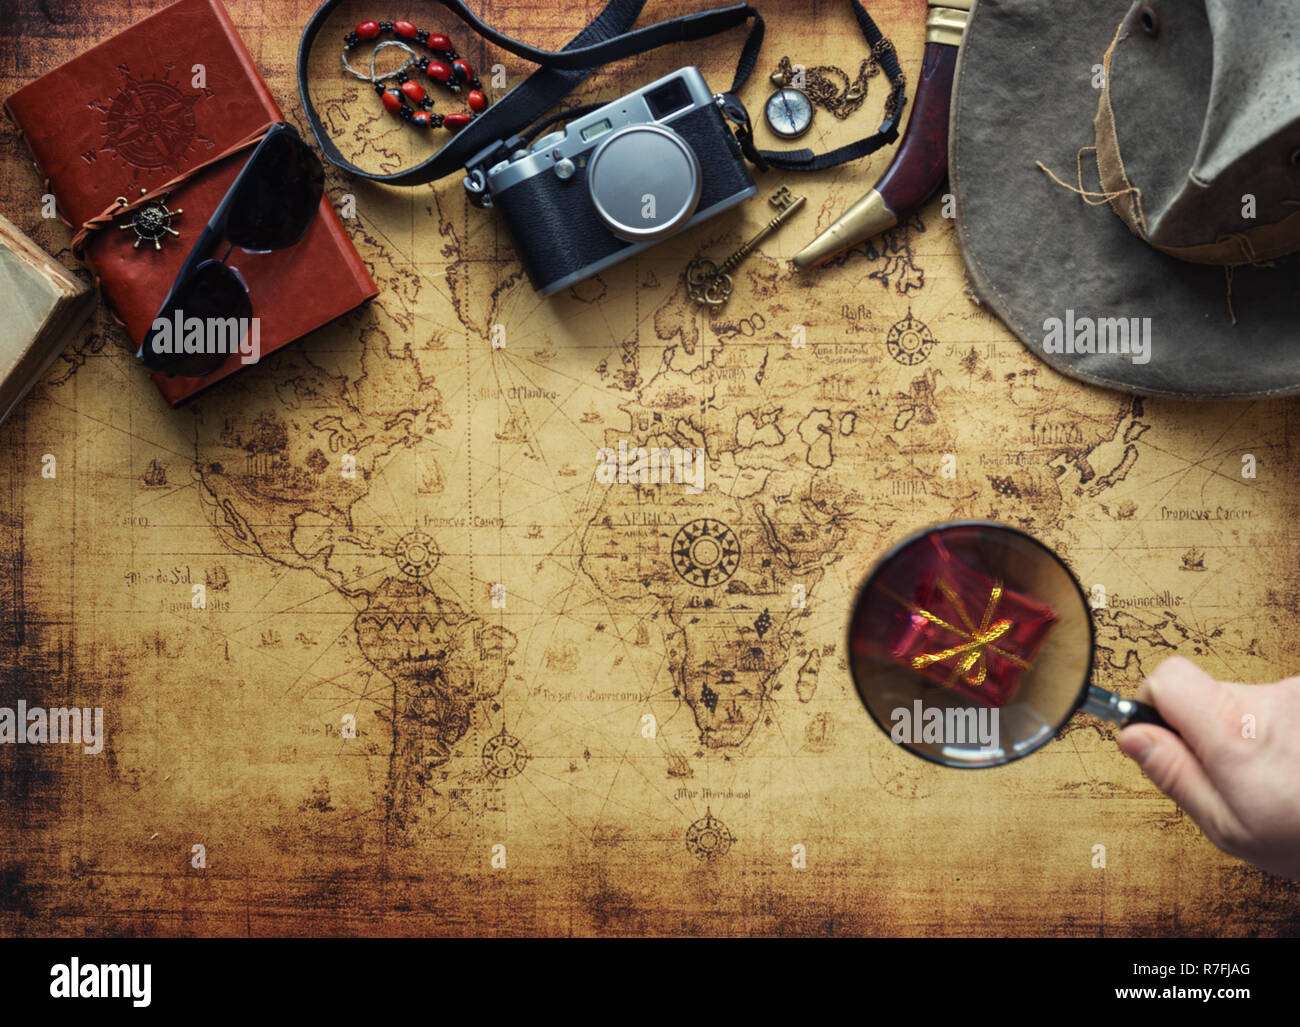 Travel Accessories Scroll Compass Chess Treasure Trove Of Antique Maps  Stock Photo - Download Image Now - iStock